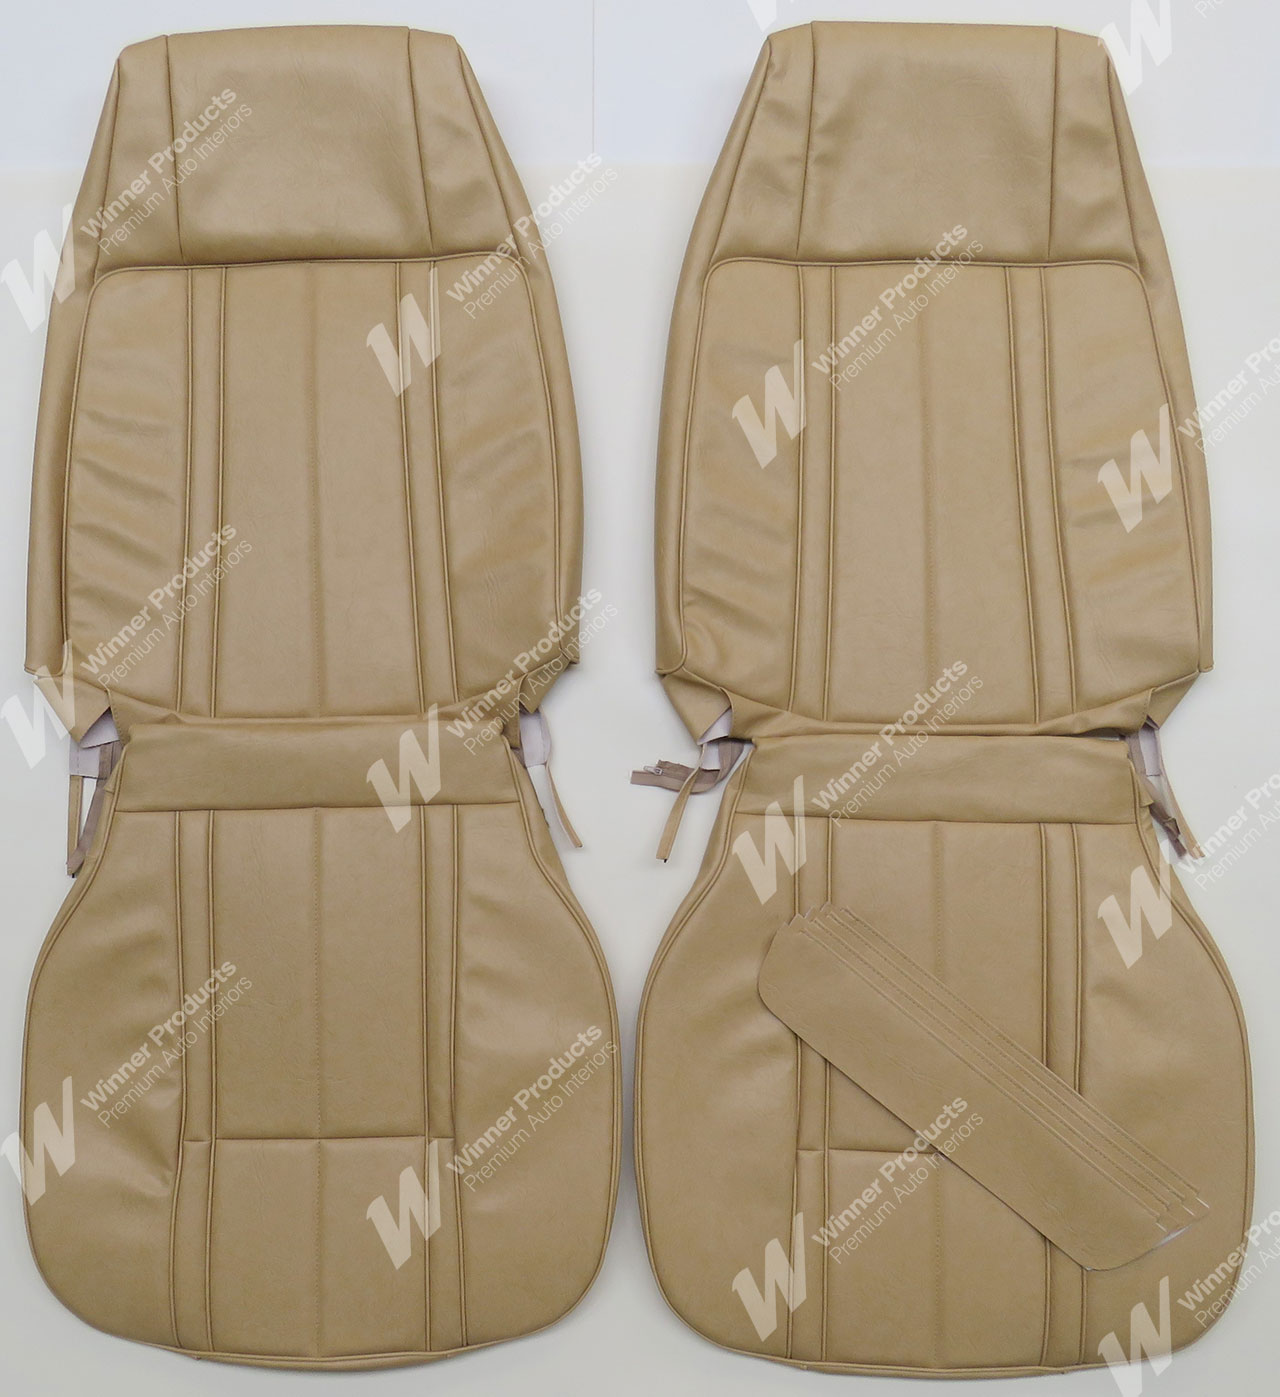 Ford GT XB GT Sedan C Chamois Seat Covers (Image 1 of 5)